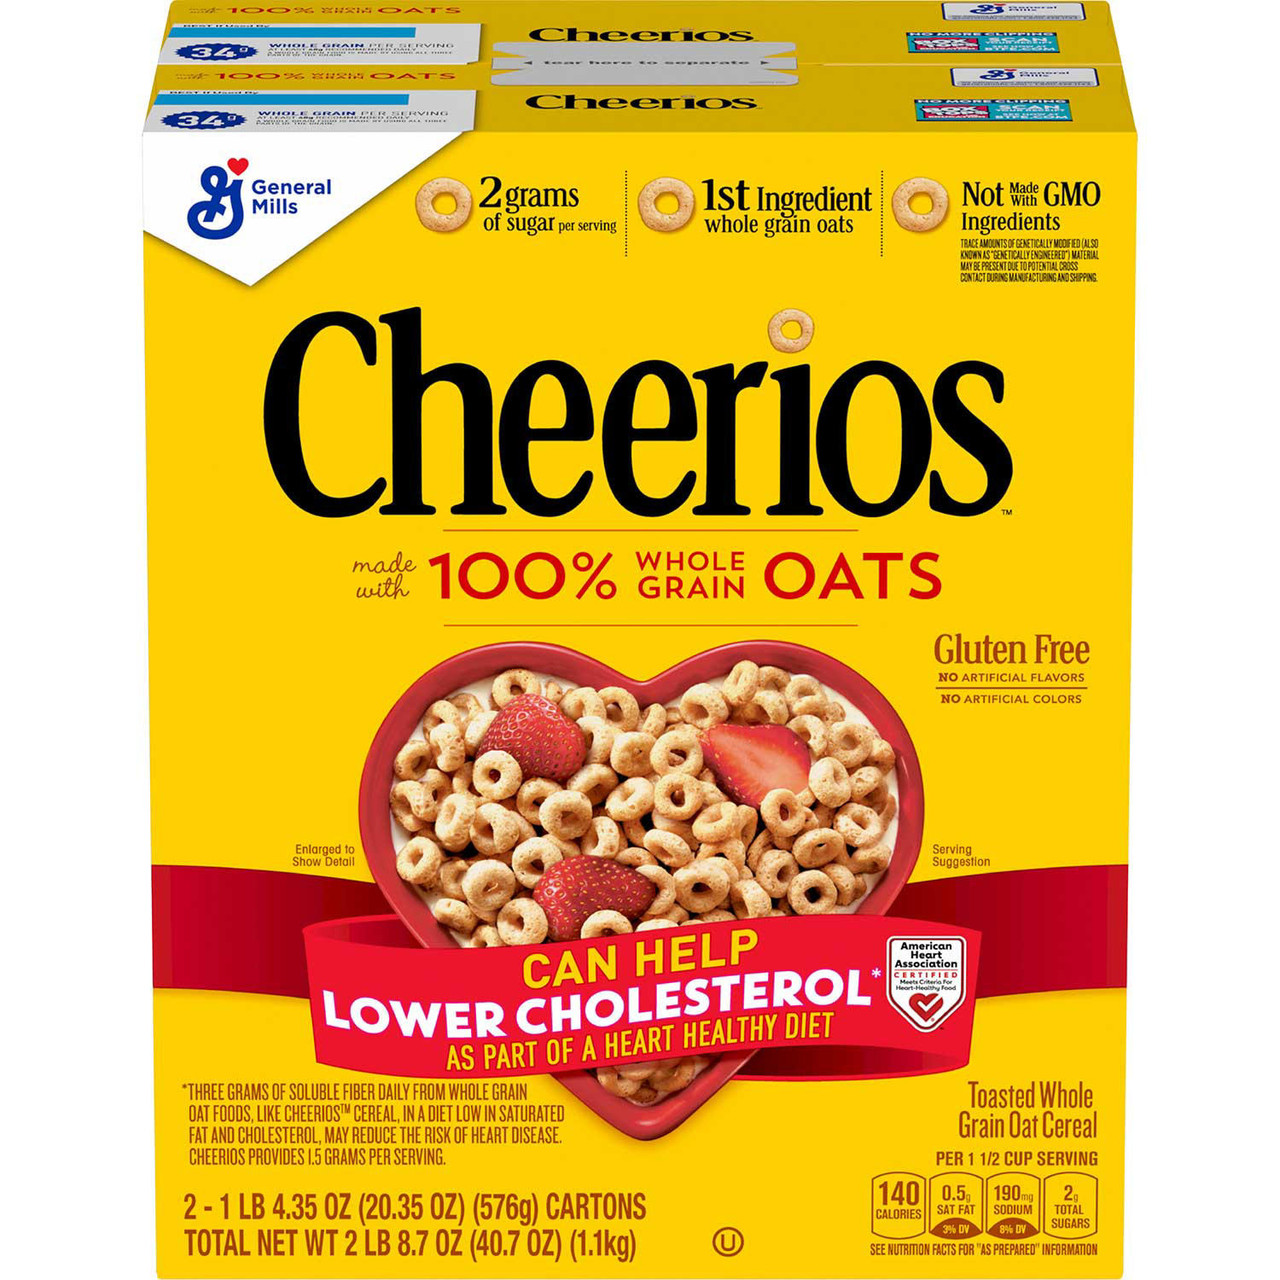 Cheerios Gluten-Free Cold Cereal (20.35 oz., 2 pk.) - [From 39.00 - Choose pk Qty ] - *Ships from Miami